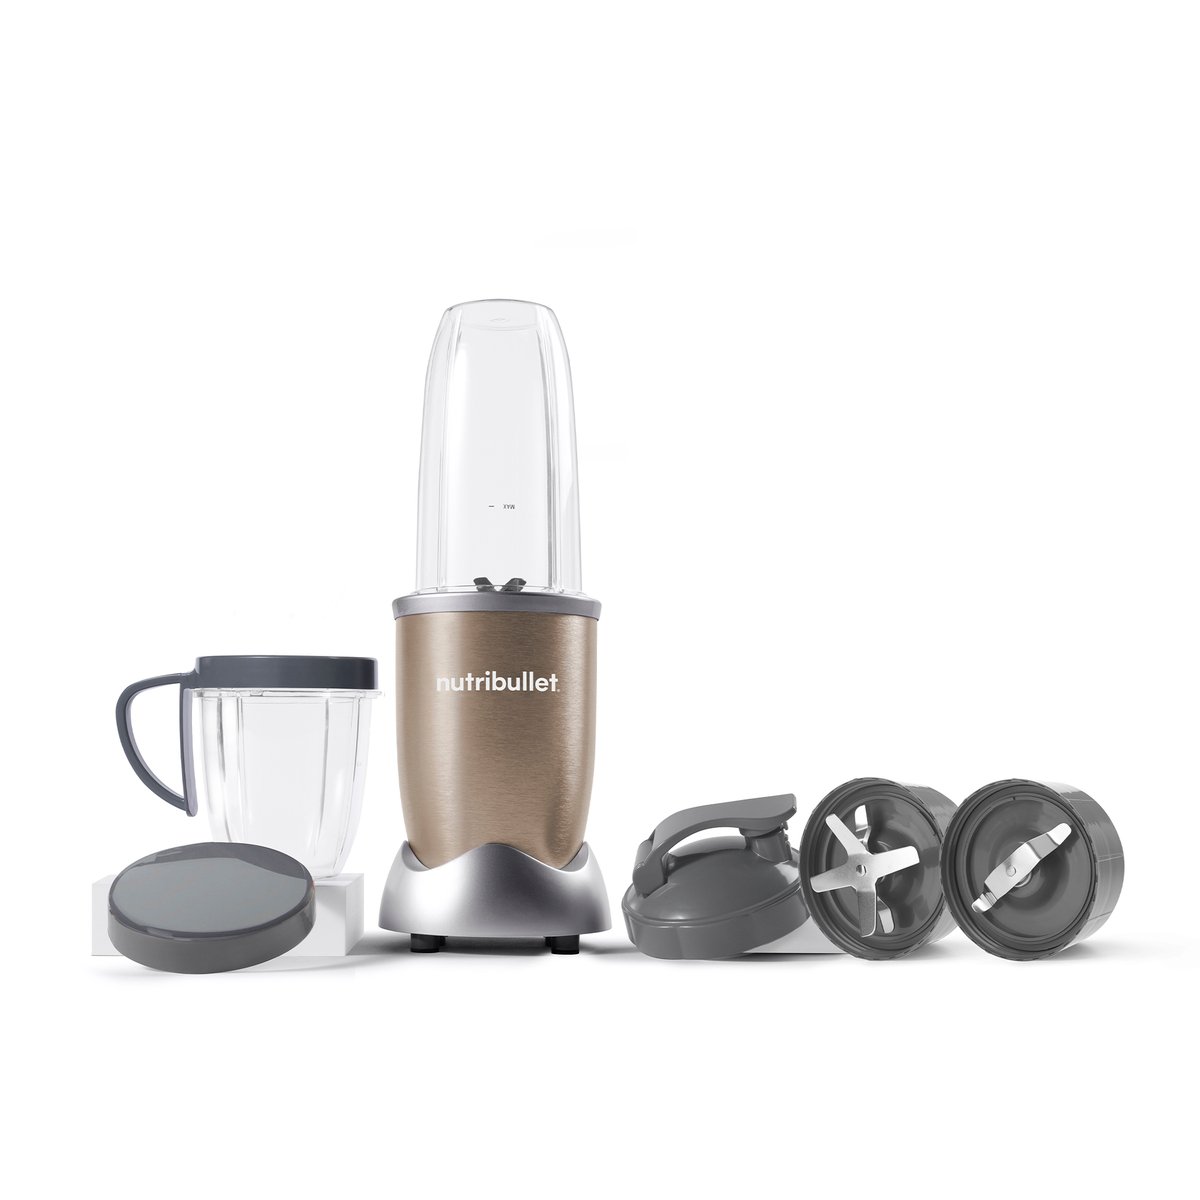 NutriBullet Multi-Function High Speed Blender, 900 W, 7 Piece Accessories, Copper Gold, NB9-1012